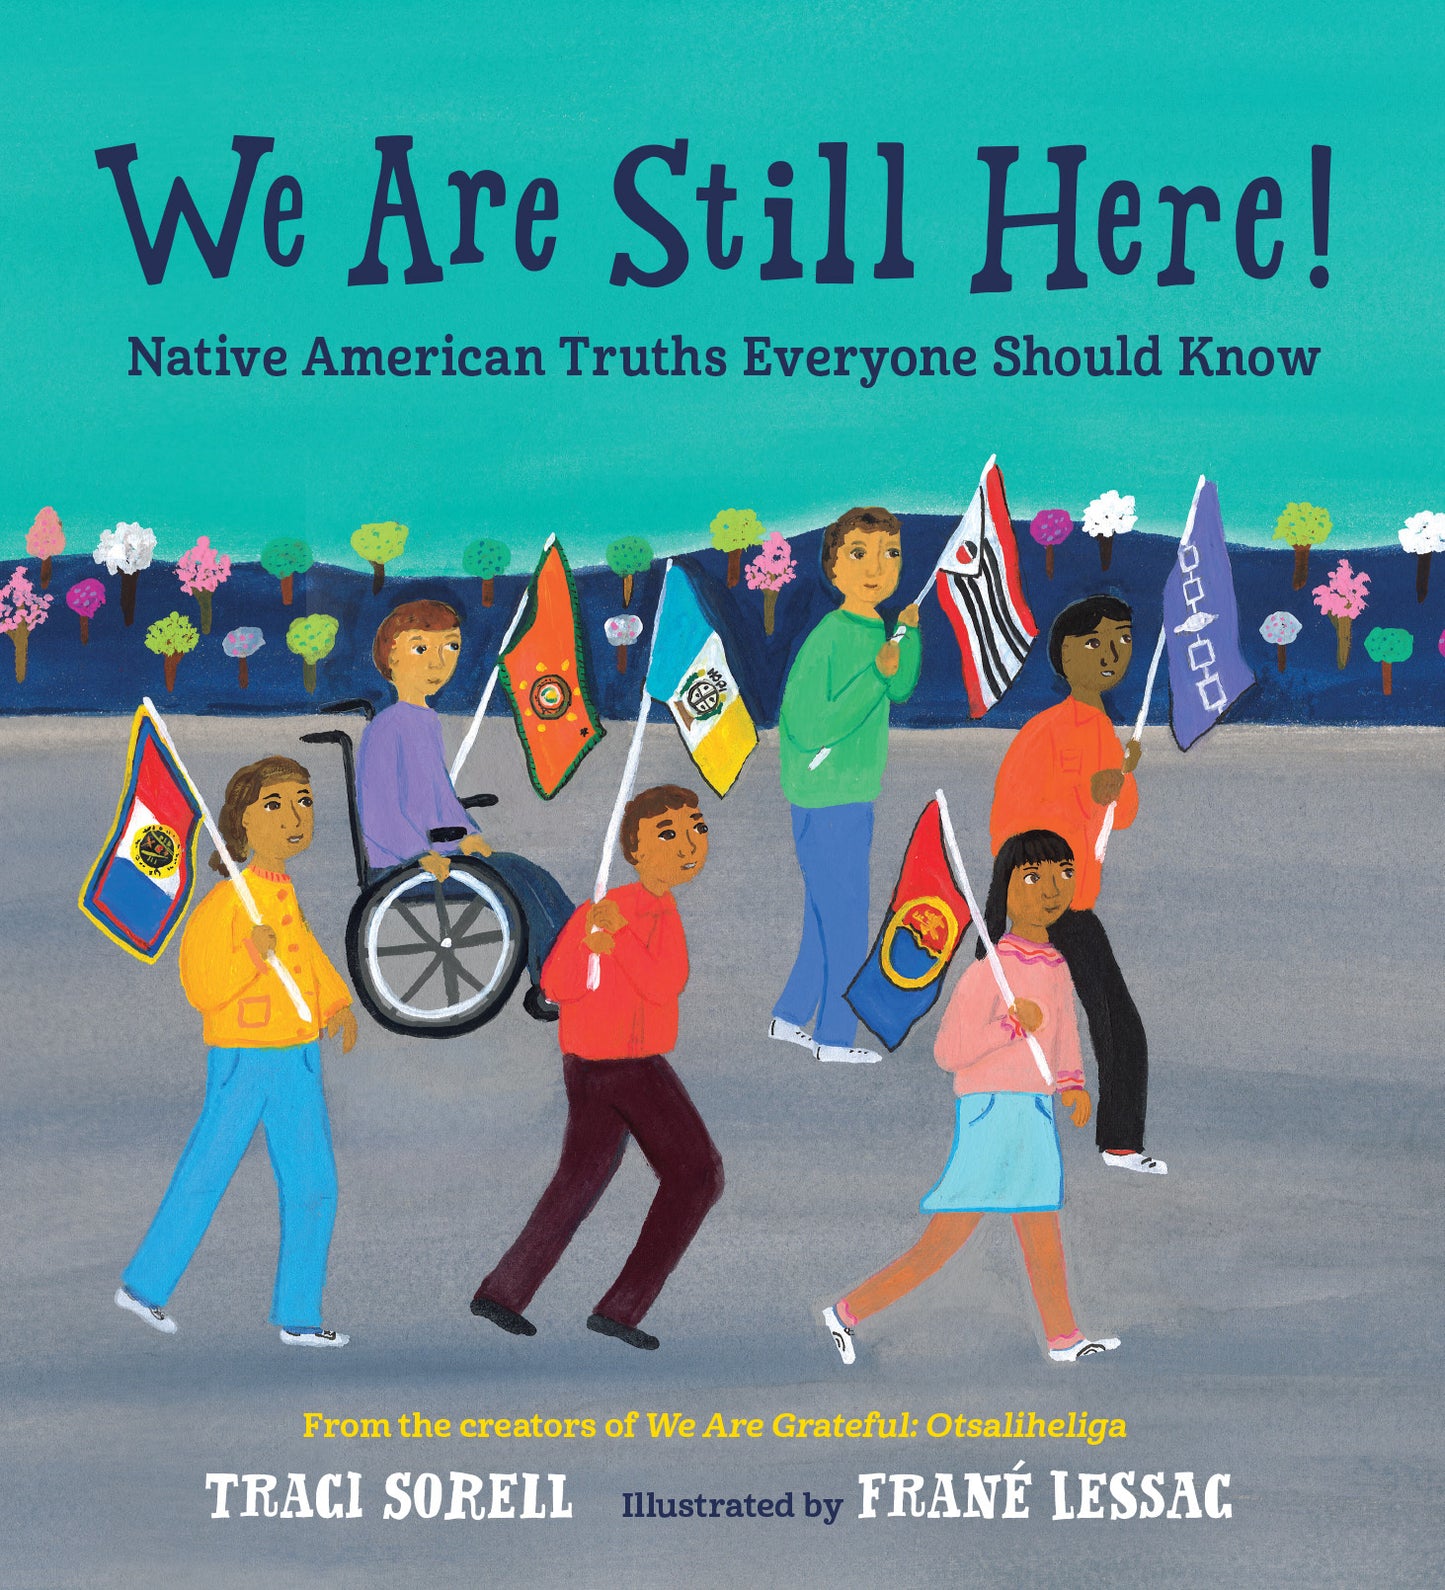 We Are Still Here! // Native American Truths Everyone Should Know